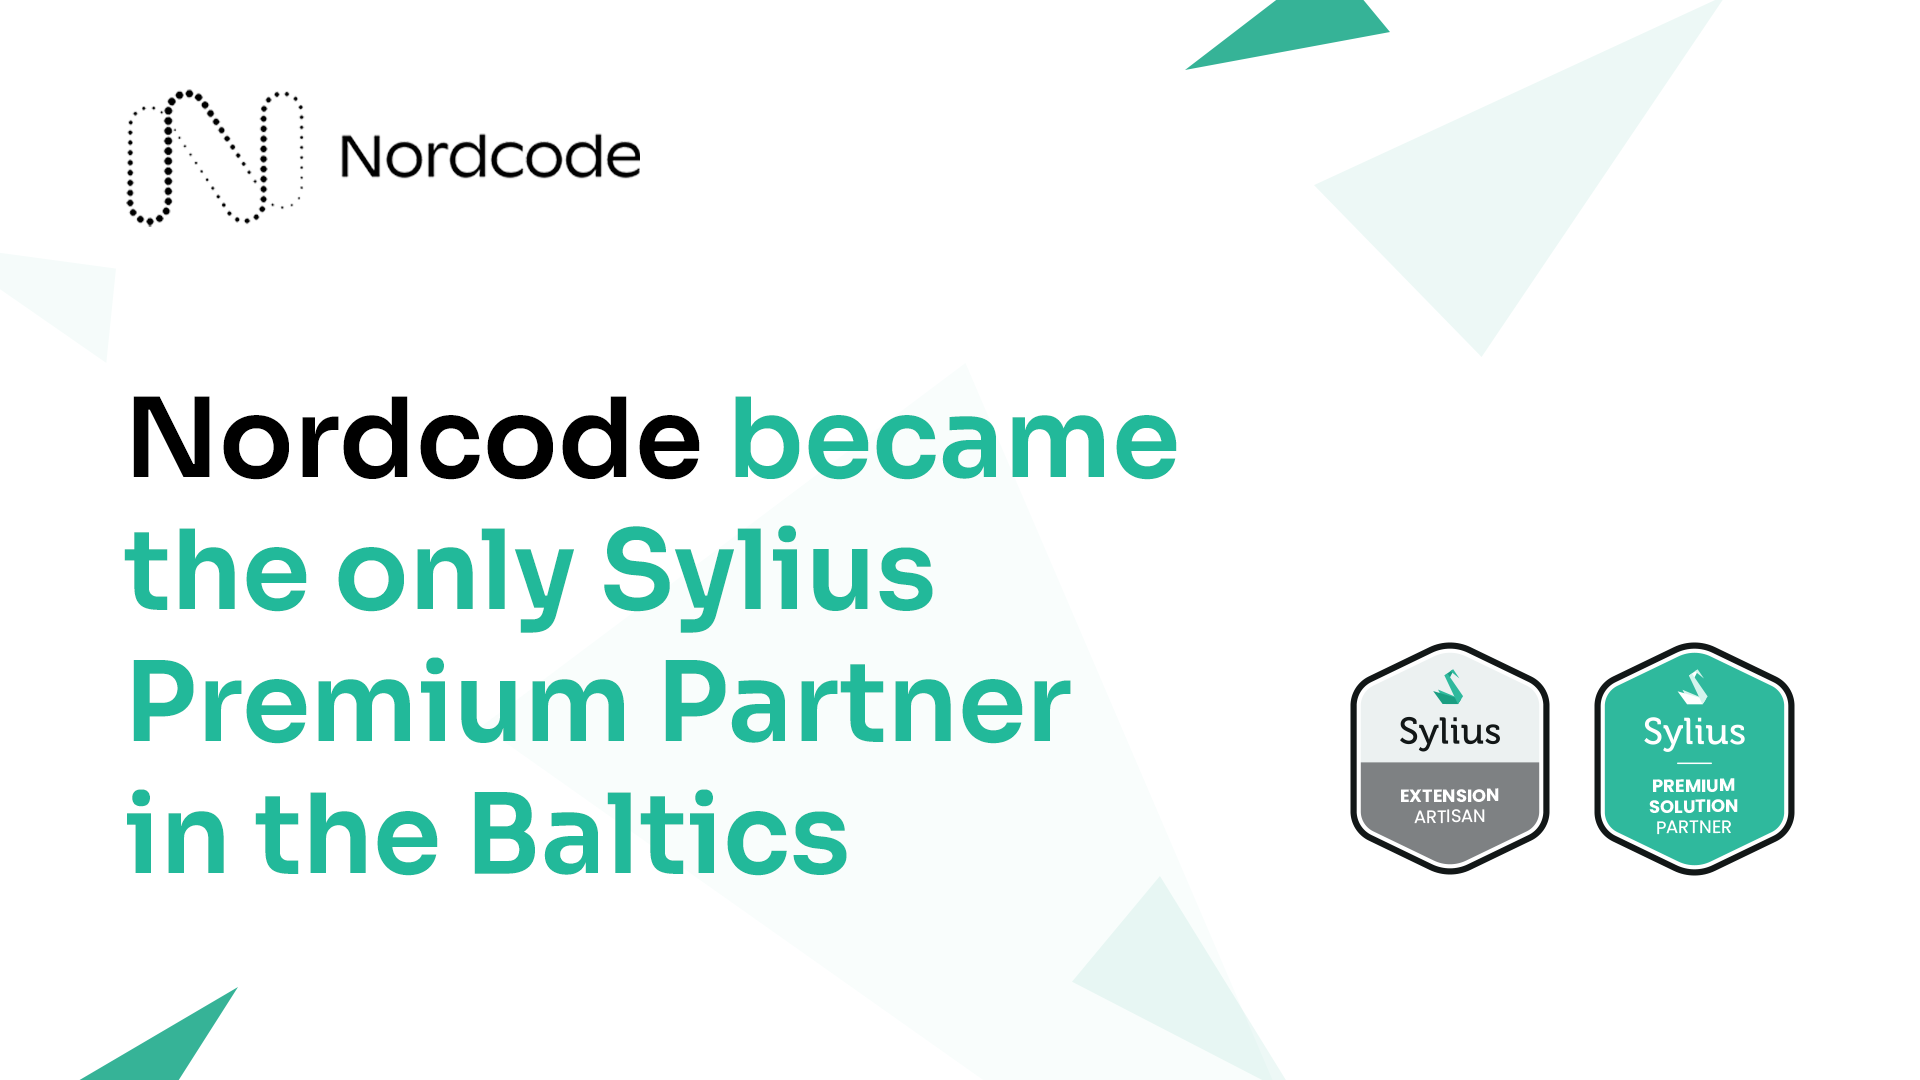 Nordcode becomes the only Sylius Premium Partner in the Baltics